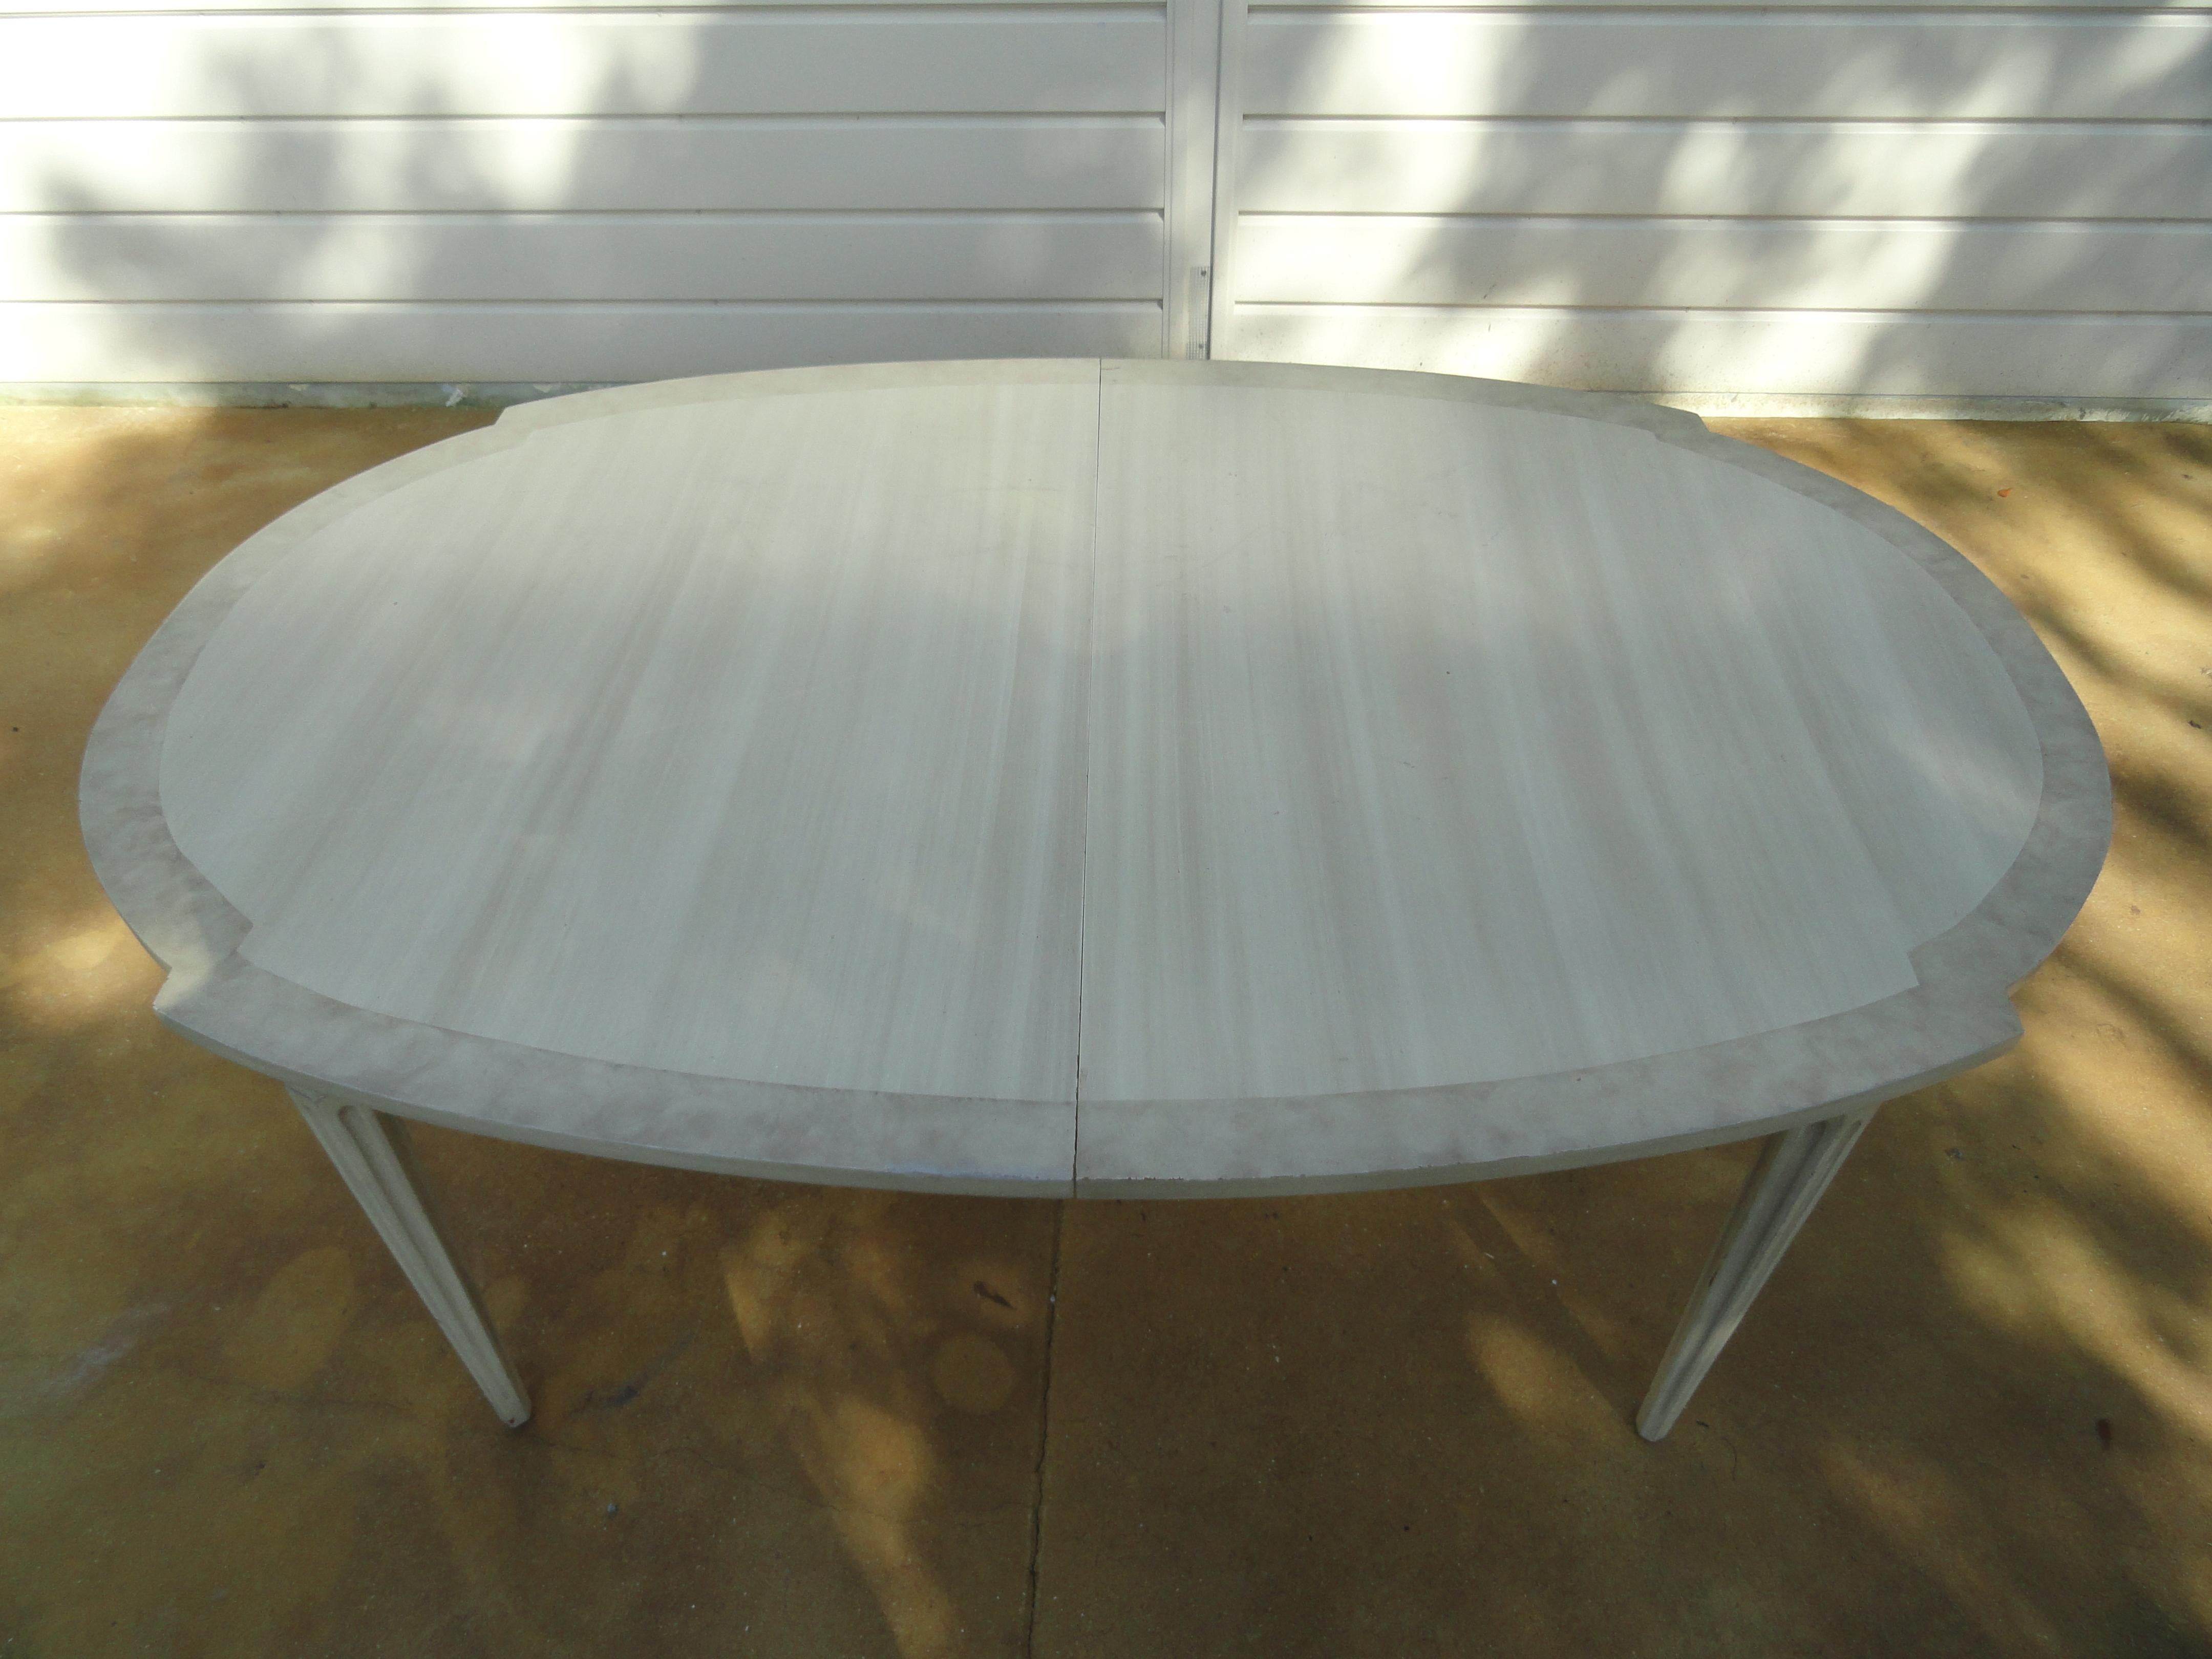 American wood painted dining table with two leafs. Scandinavian influenced painted table with gray and white with a beautiful border. Table has a continuous apron with the leafs inserted. Legs are fluted. Solid table of maple and burl wood. American